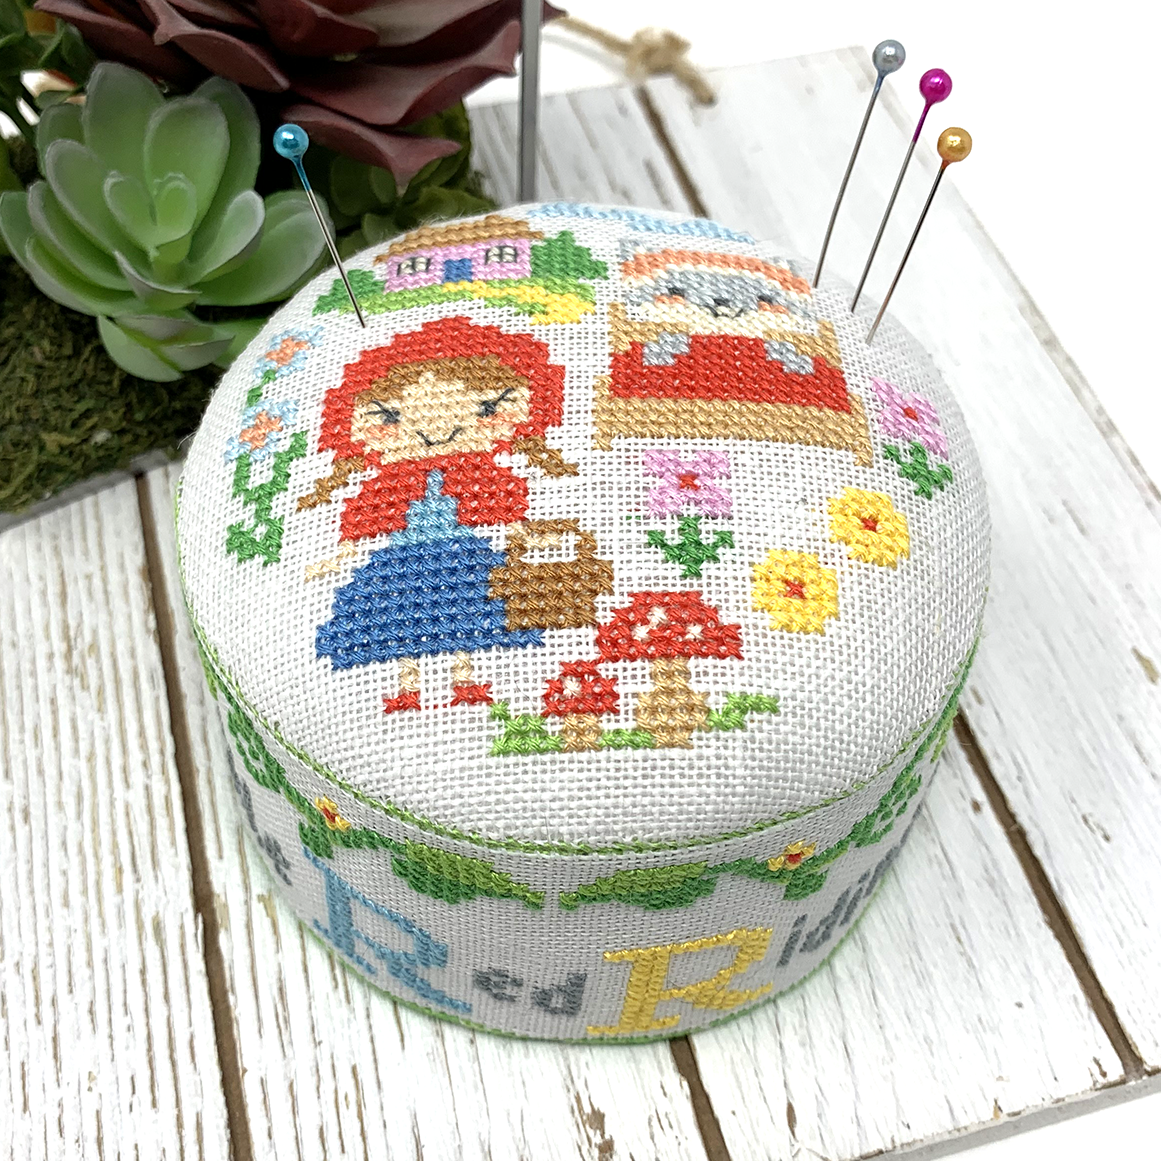 Pincushion With Colorful Pins Stock Photo - Download Image Now